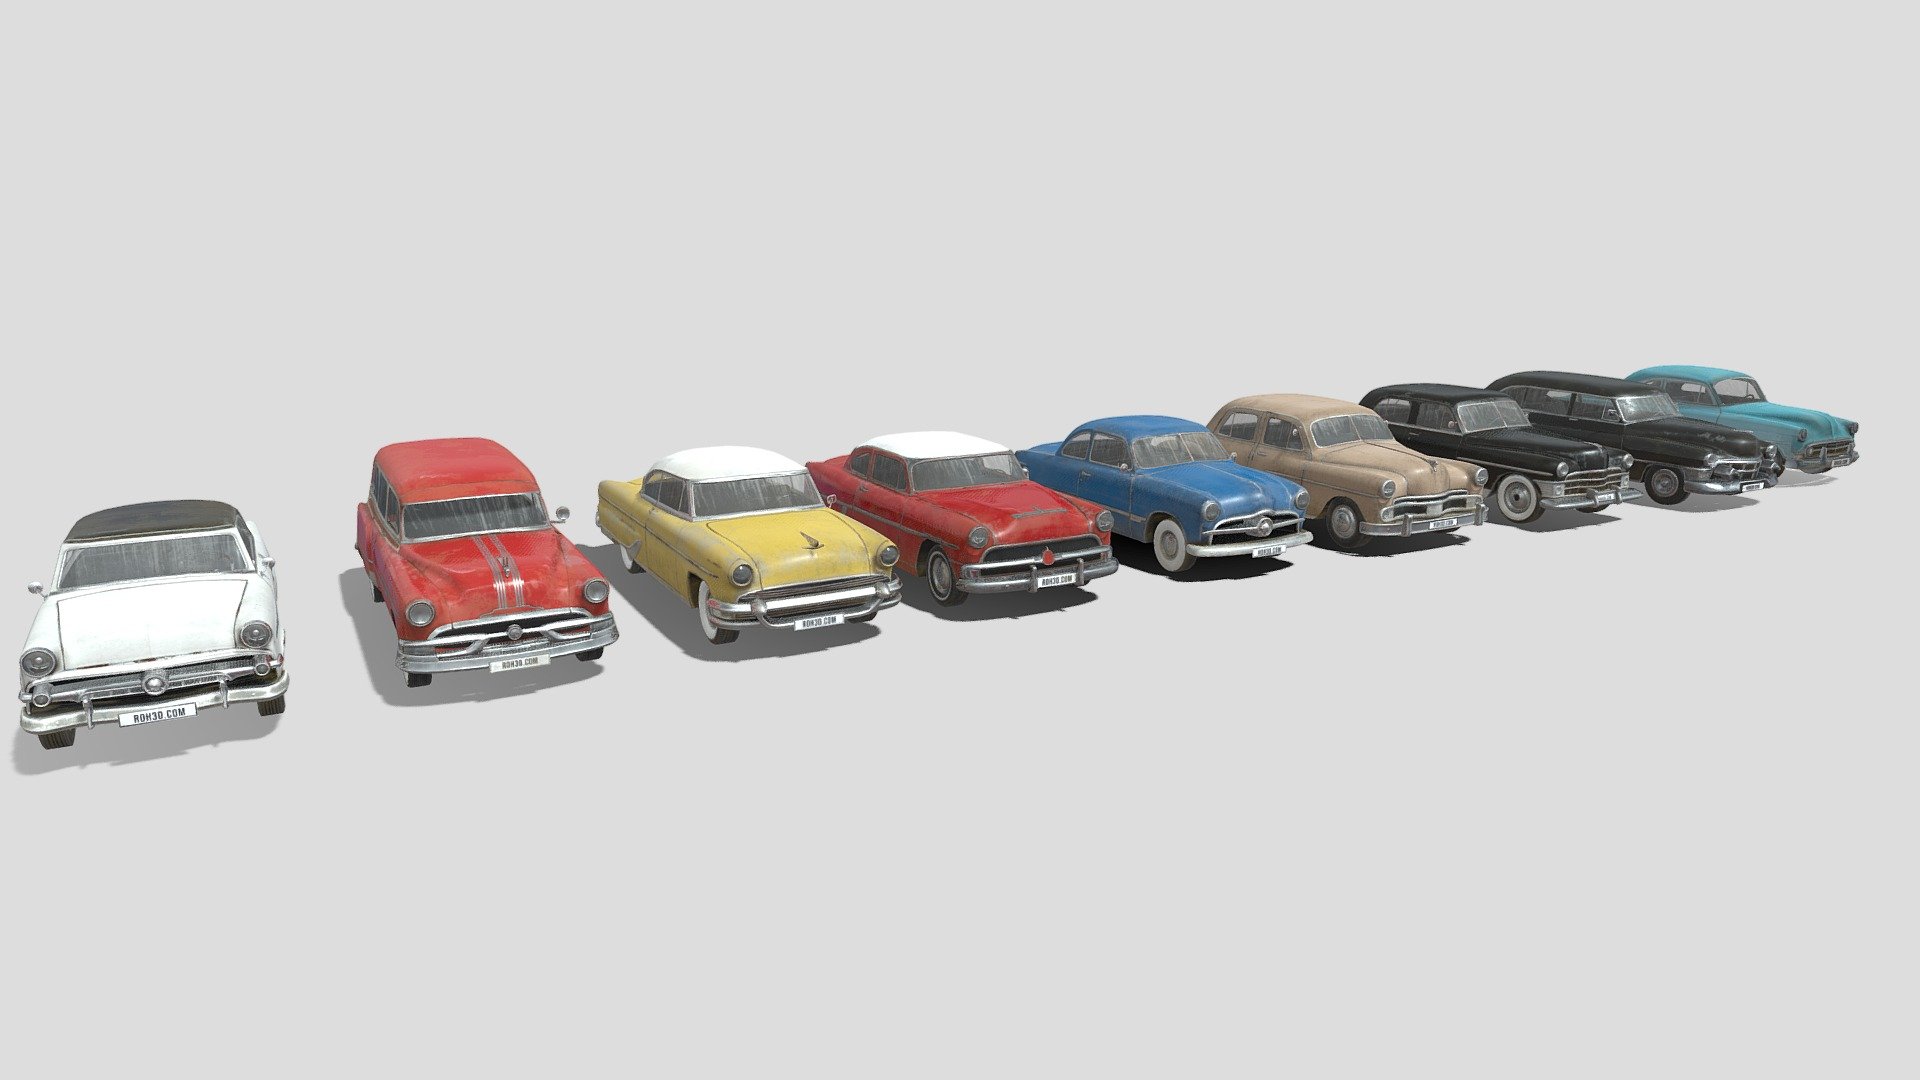 This collection contain 9 cars from 1950:




Cadillac 75 Sedan 1953

Chevrolet Club Coupe 1953

Chrysler NewYorker 1950

Dodge Coronet Sedan 1950

Ford Crestline Sunliner 1954

Ford Custom Club Coupe 1949

Hudson Hornet 1943

Lincoln Capri Hardtop Coupe 1955

Pontiac Chieftain Deluxe Station Wagon 1953
 - Classic 1950 Cars Pack - Buy Royalty Free 3D model by ROH3D 3d model